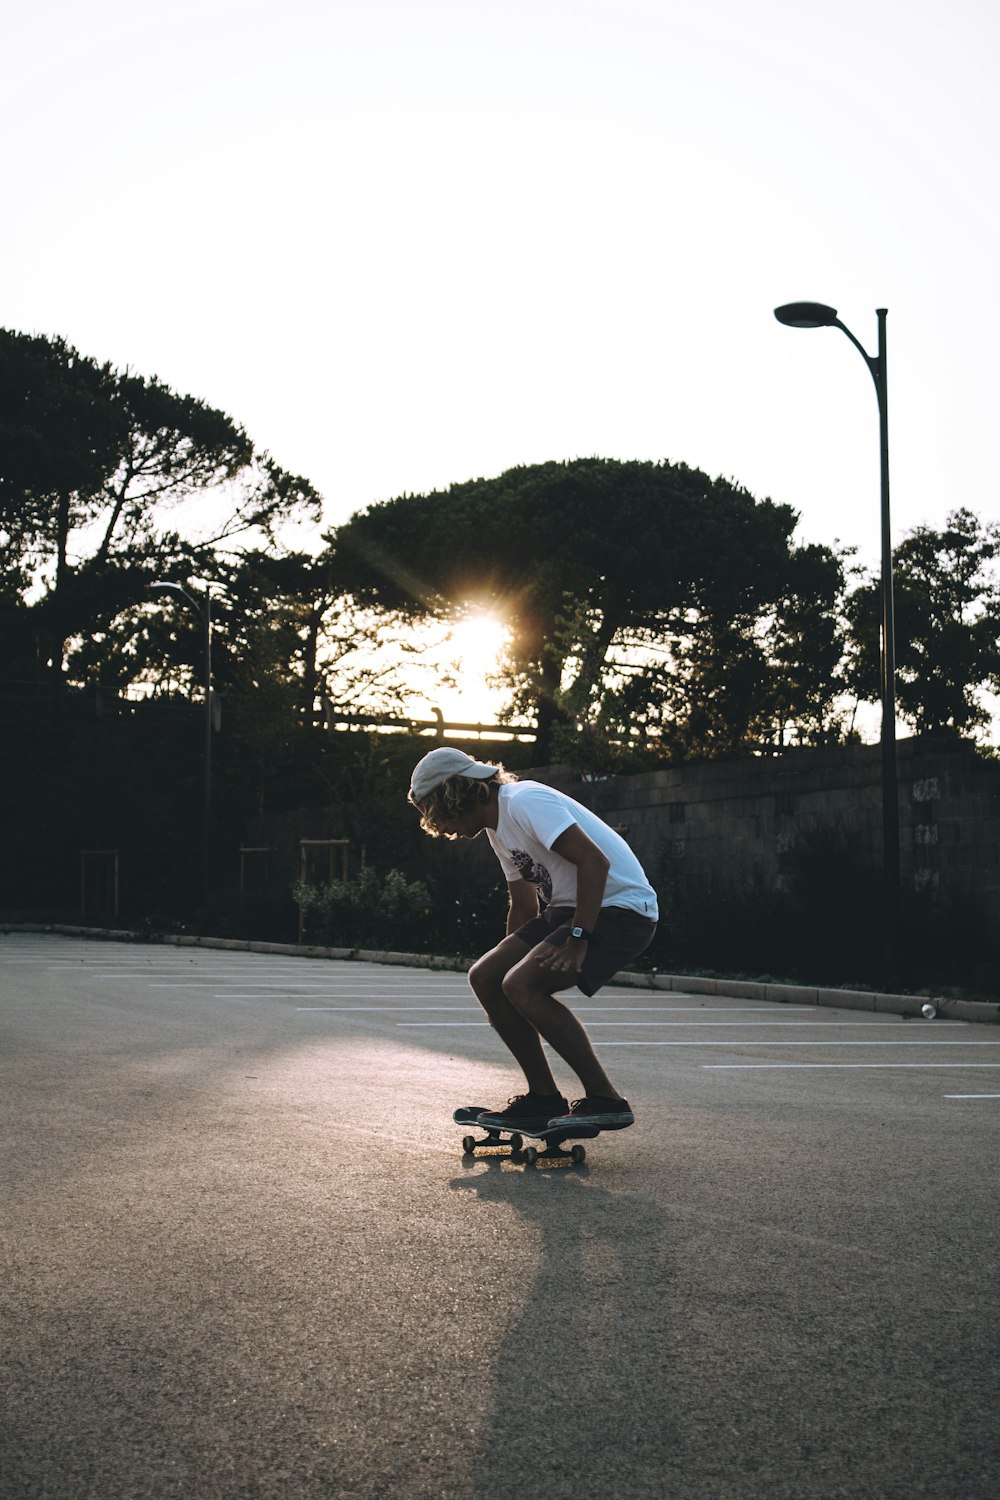 man riding skateboard at the middle of the empty road